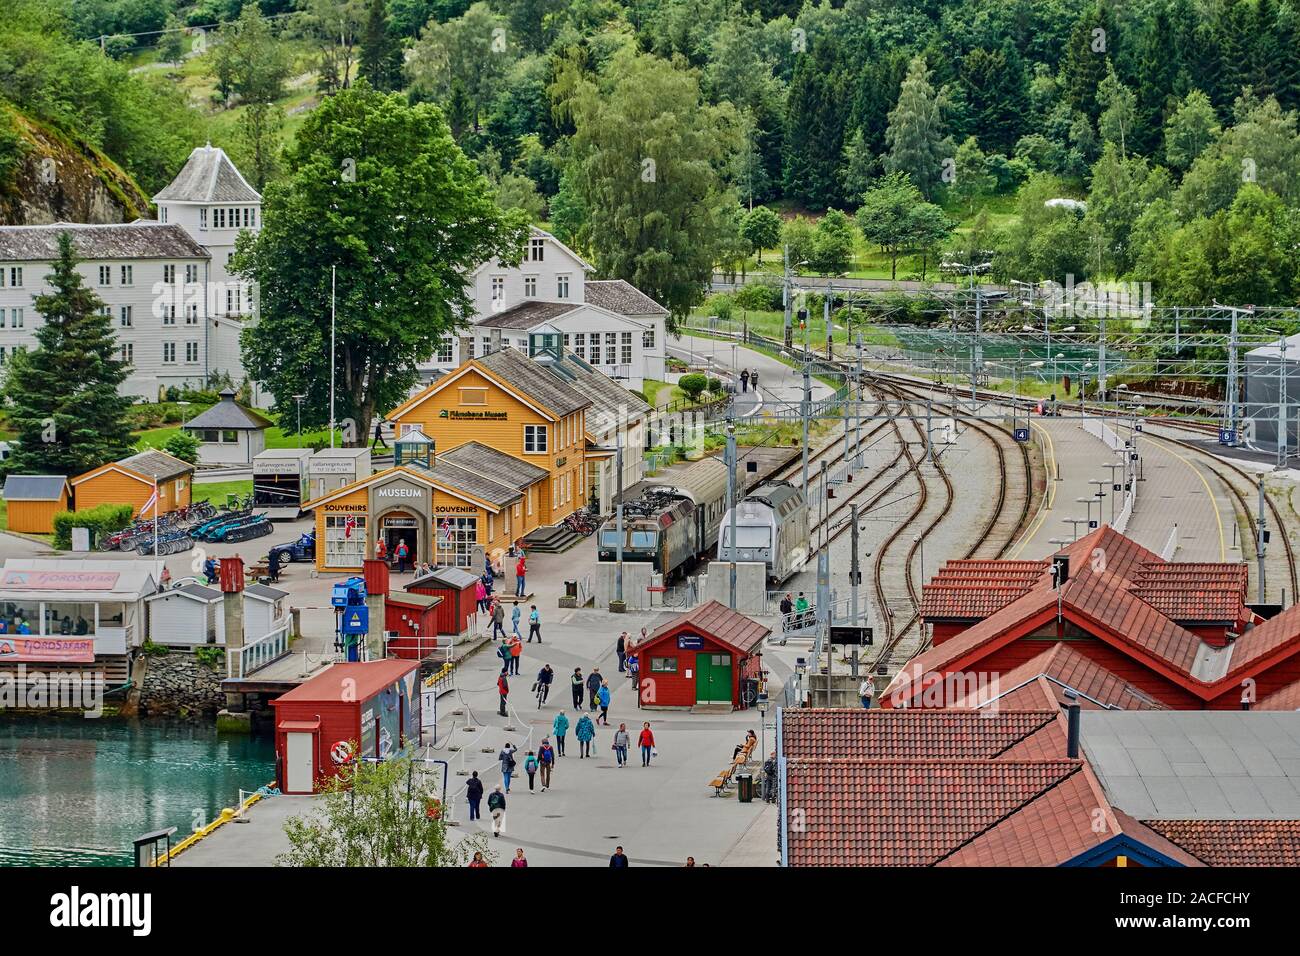 The small village Flåm is one of the most popular destinations in Norway and Scandinavia due to its stunning scenery and location. Stock Photo